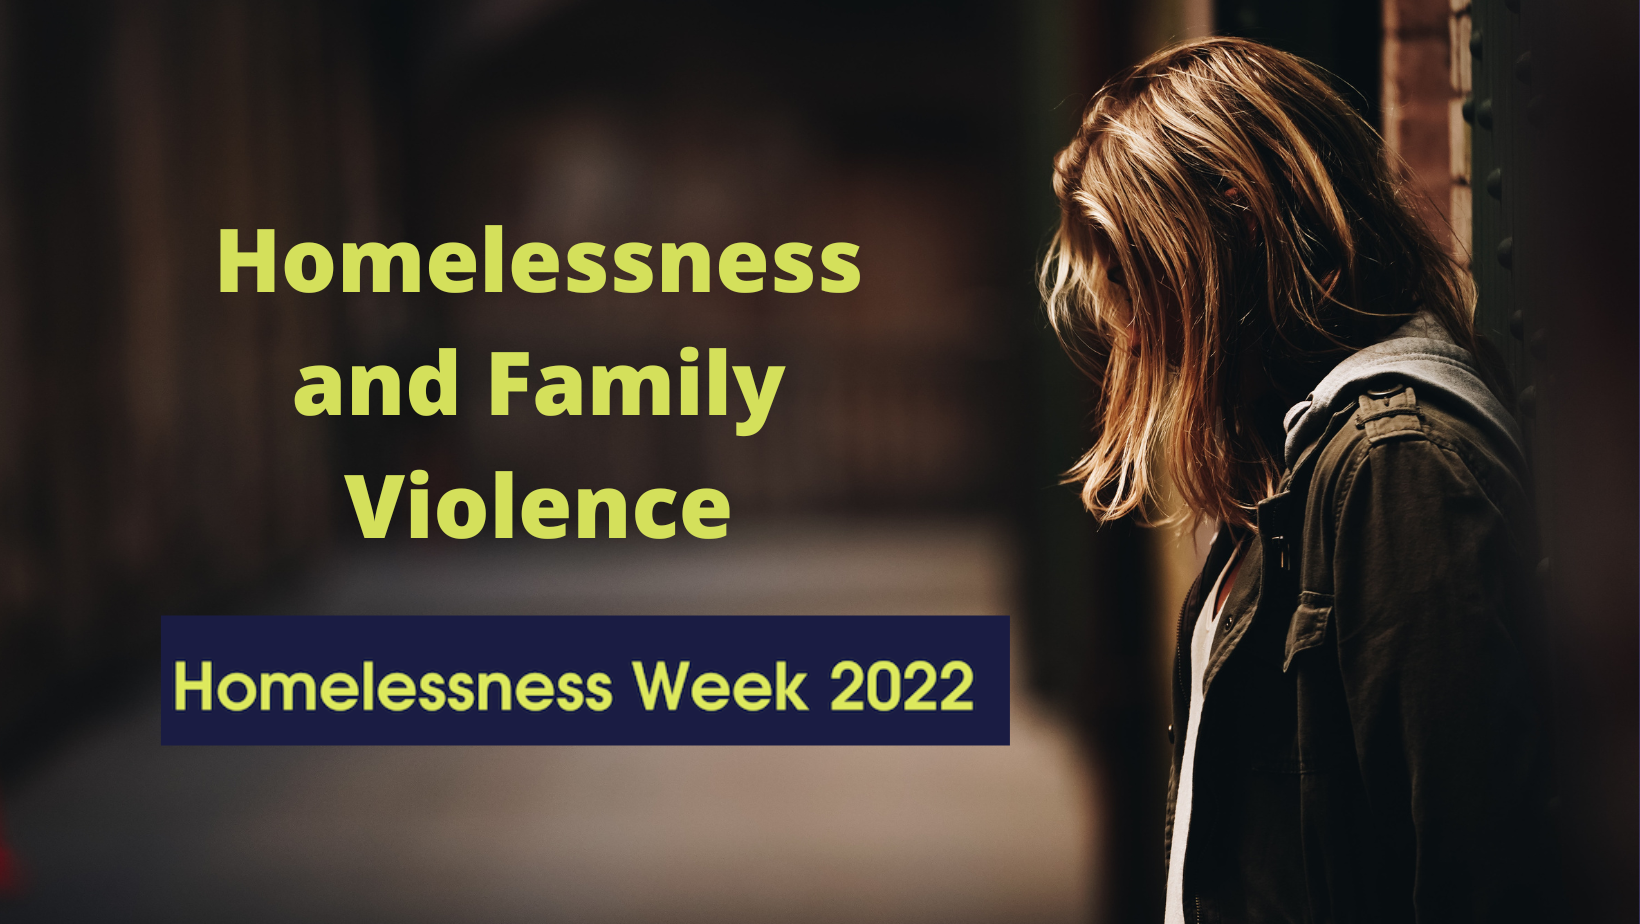 Homelessness and Family Violence